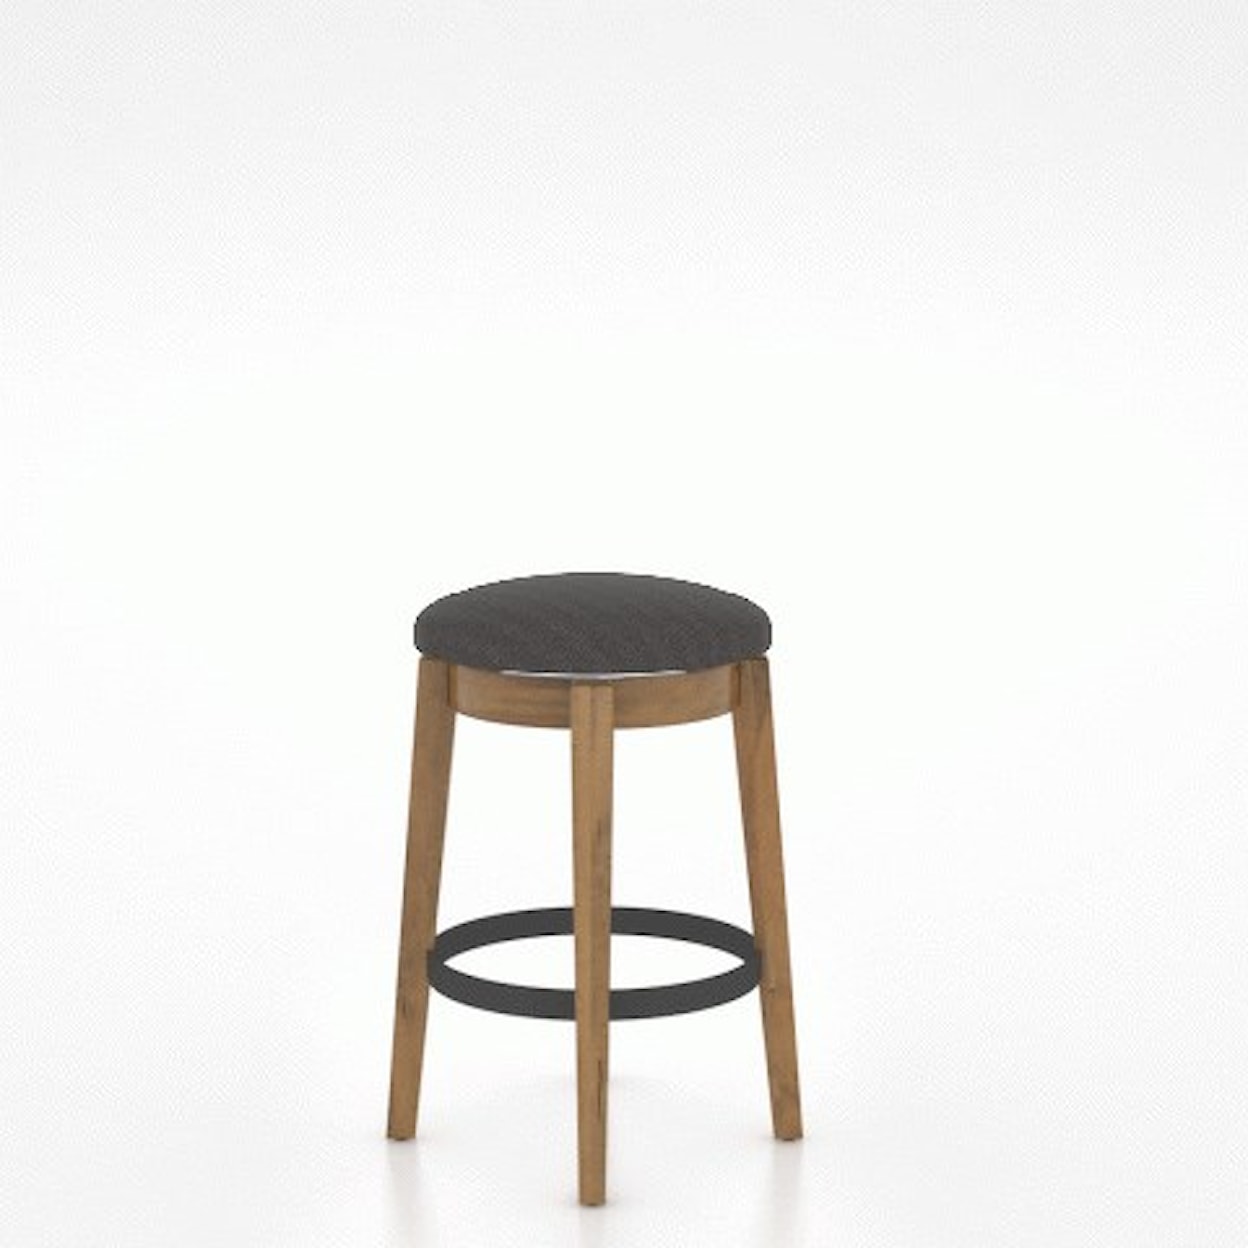 Canadel East Side Customizable Backless Upholstered Stool